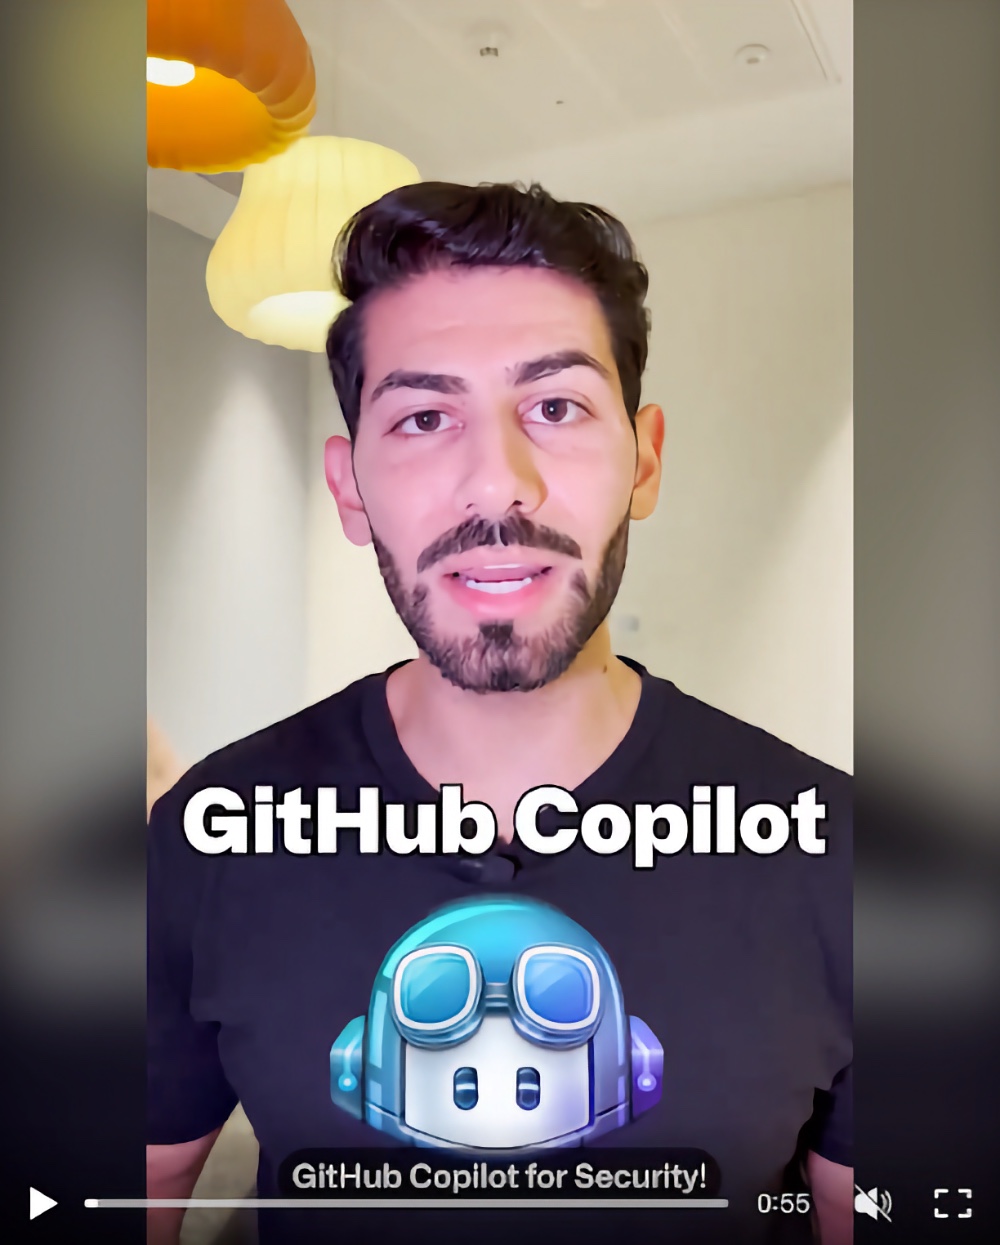 Video still from a GitHub Copilot security video on LinkedIn